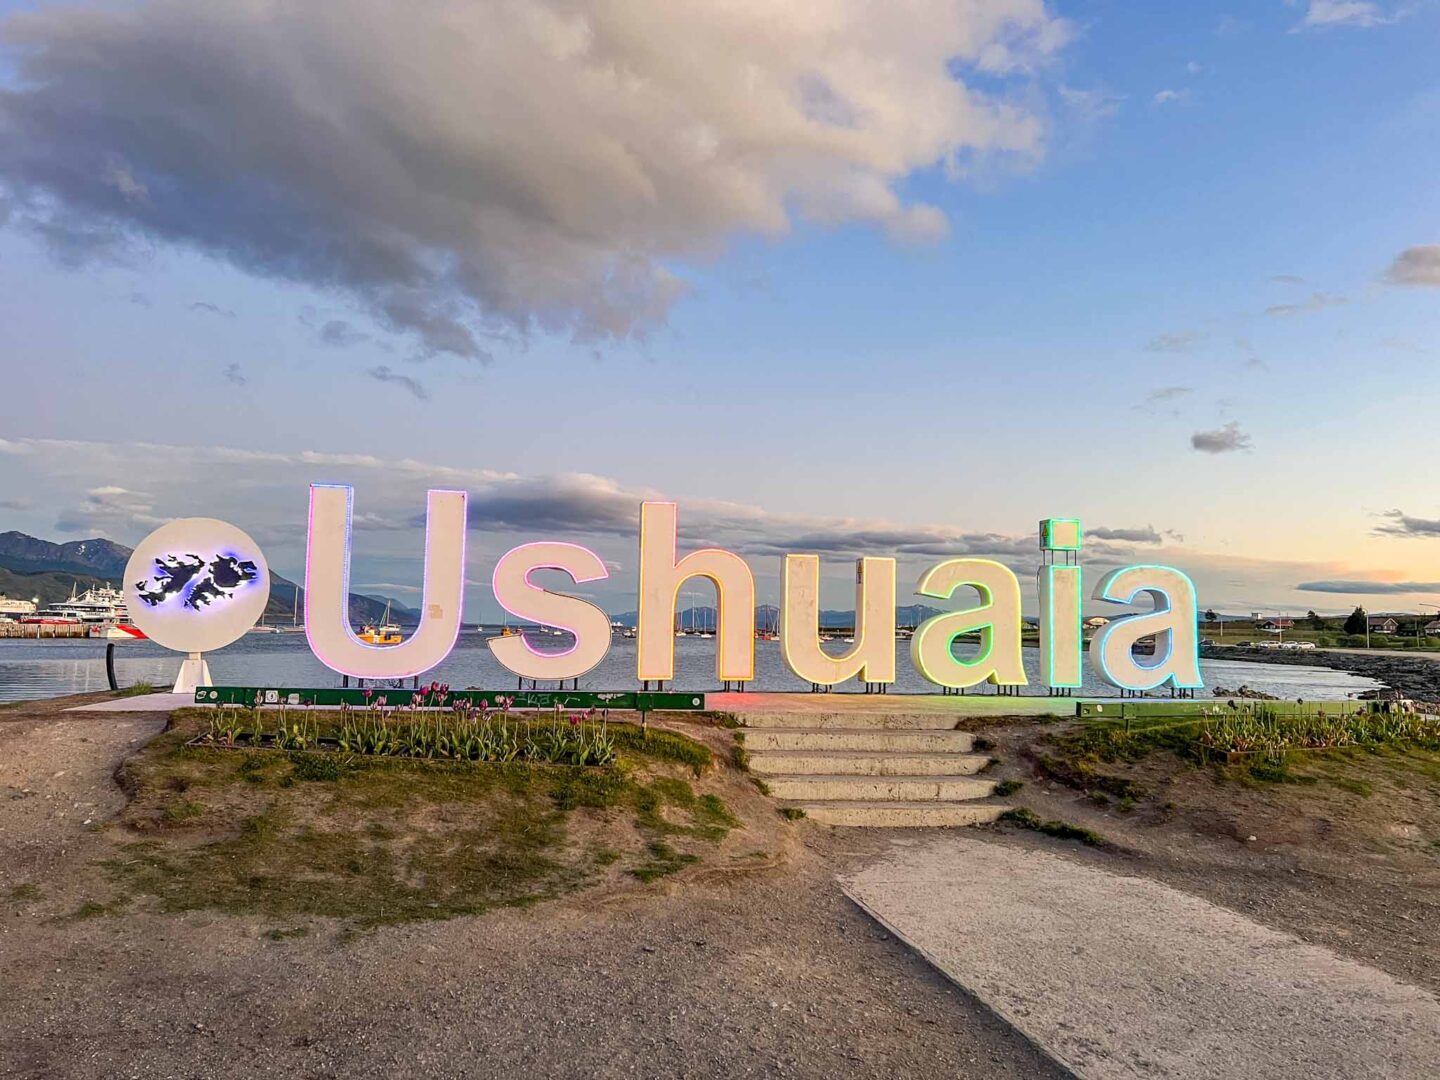 things to do in Ushuaia, Ushuaia sign lit up at sunset